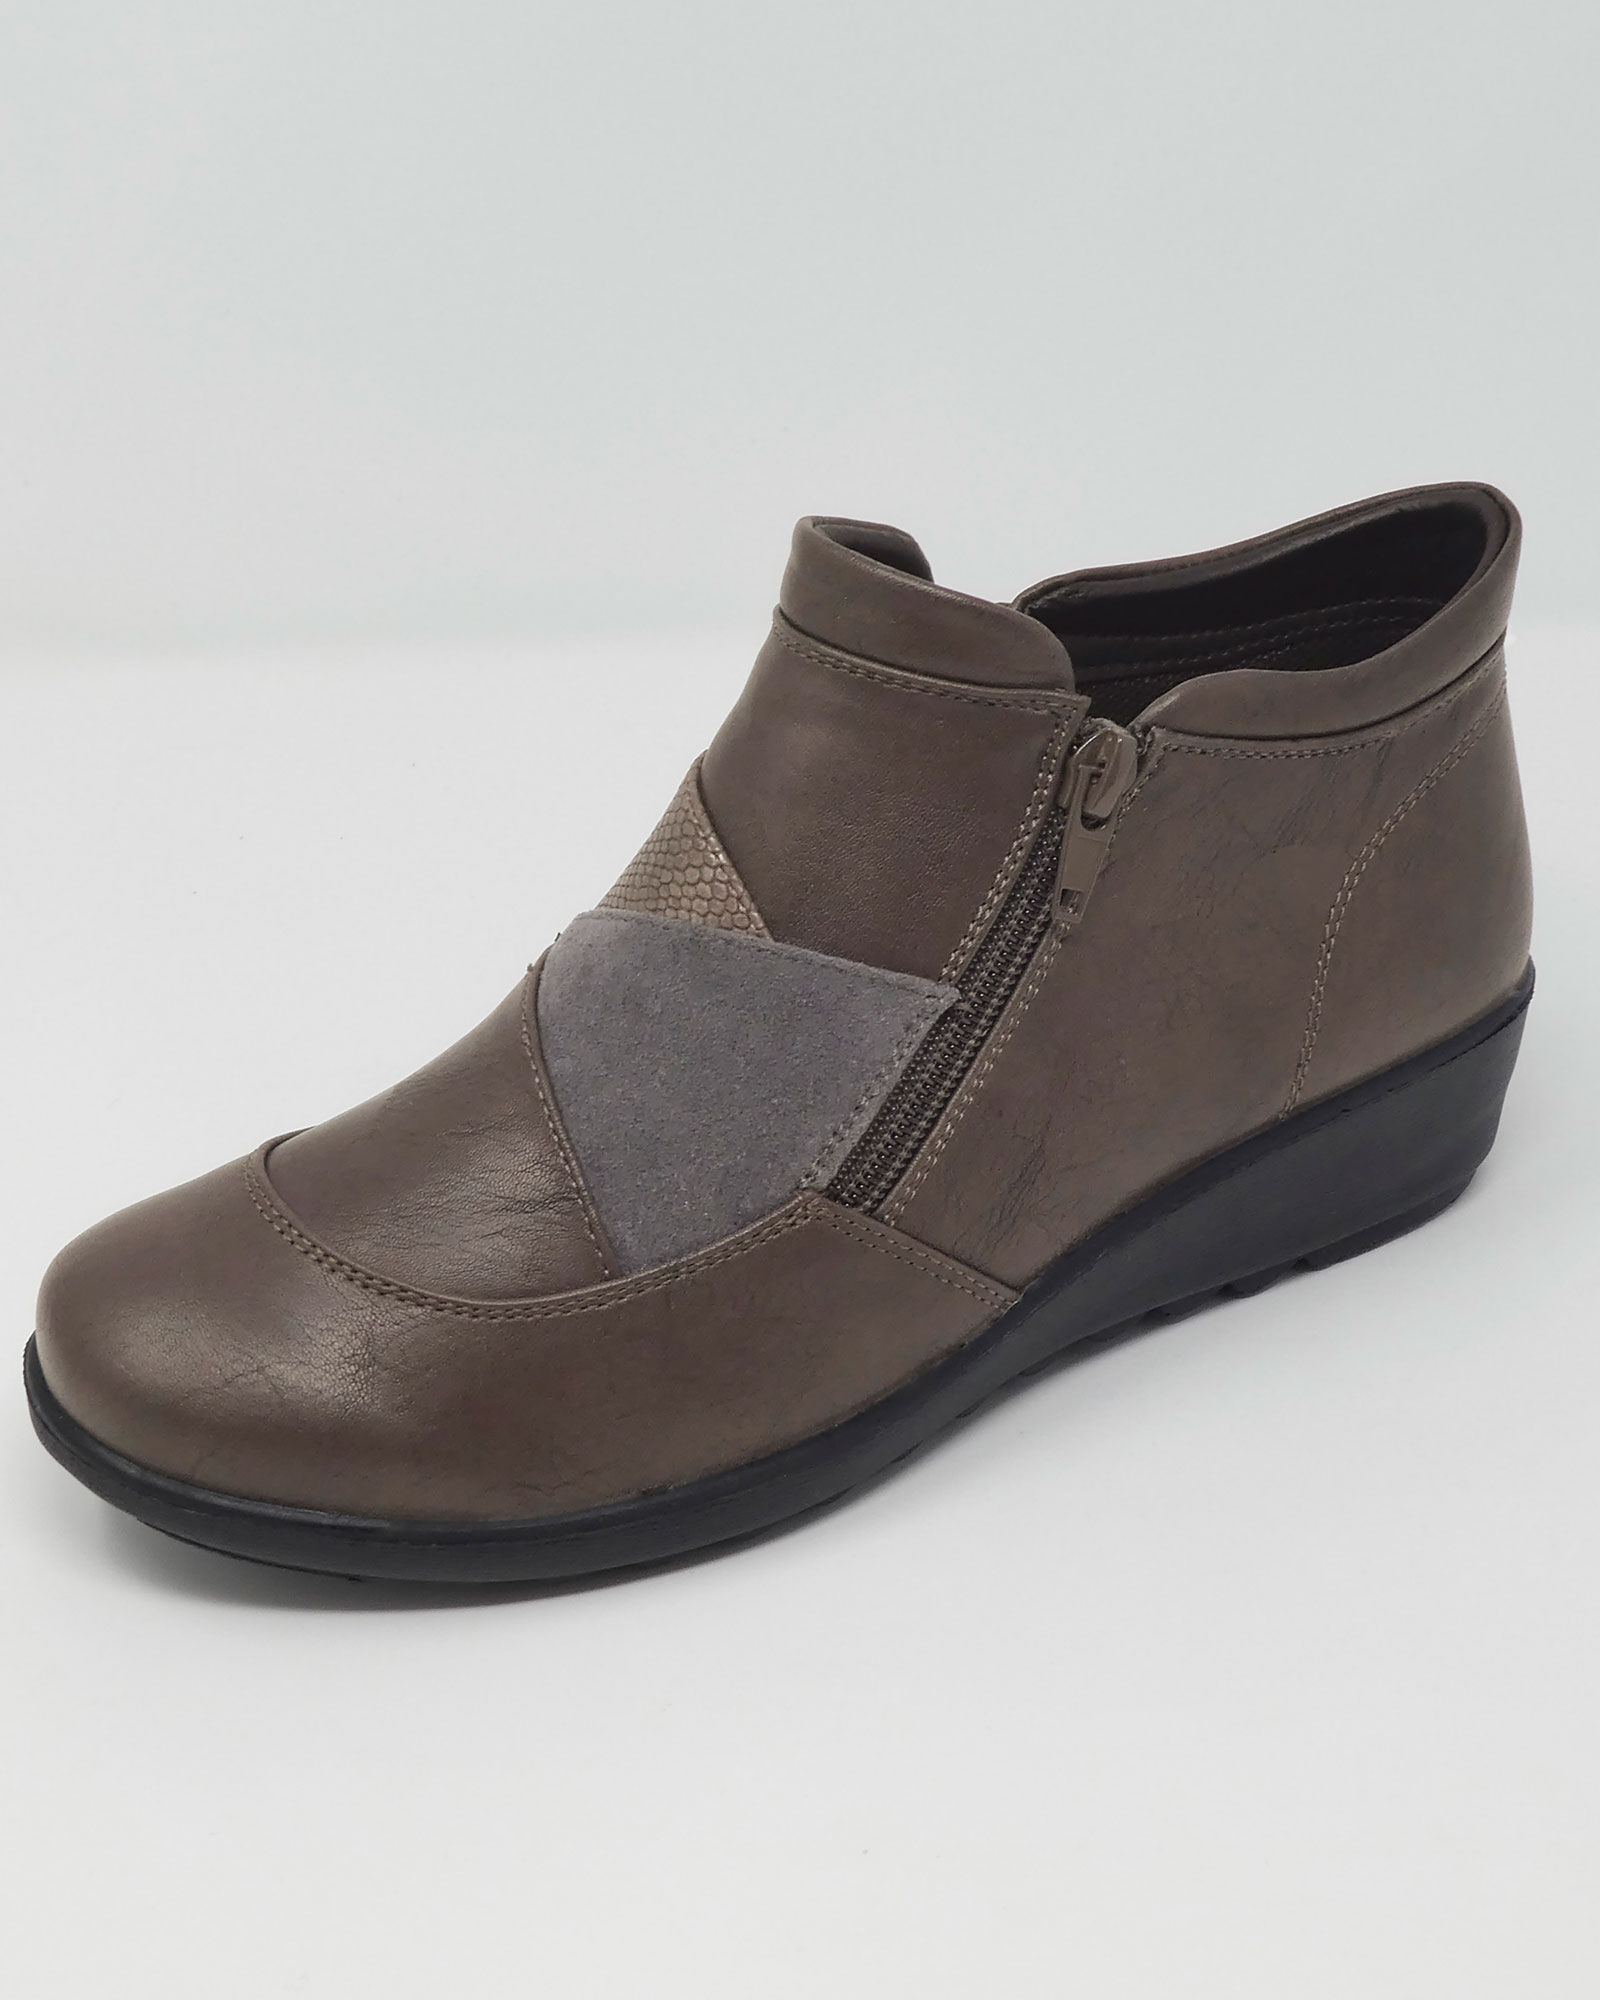 cotton traders ladies ankle boots